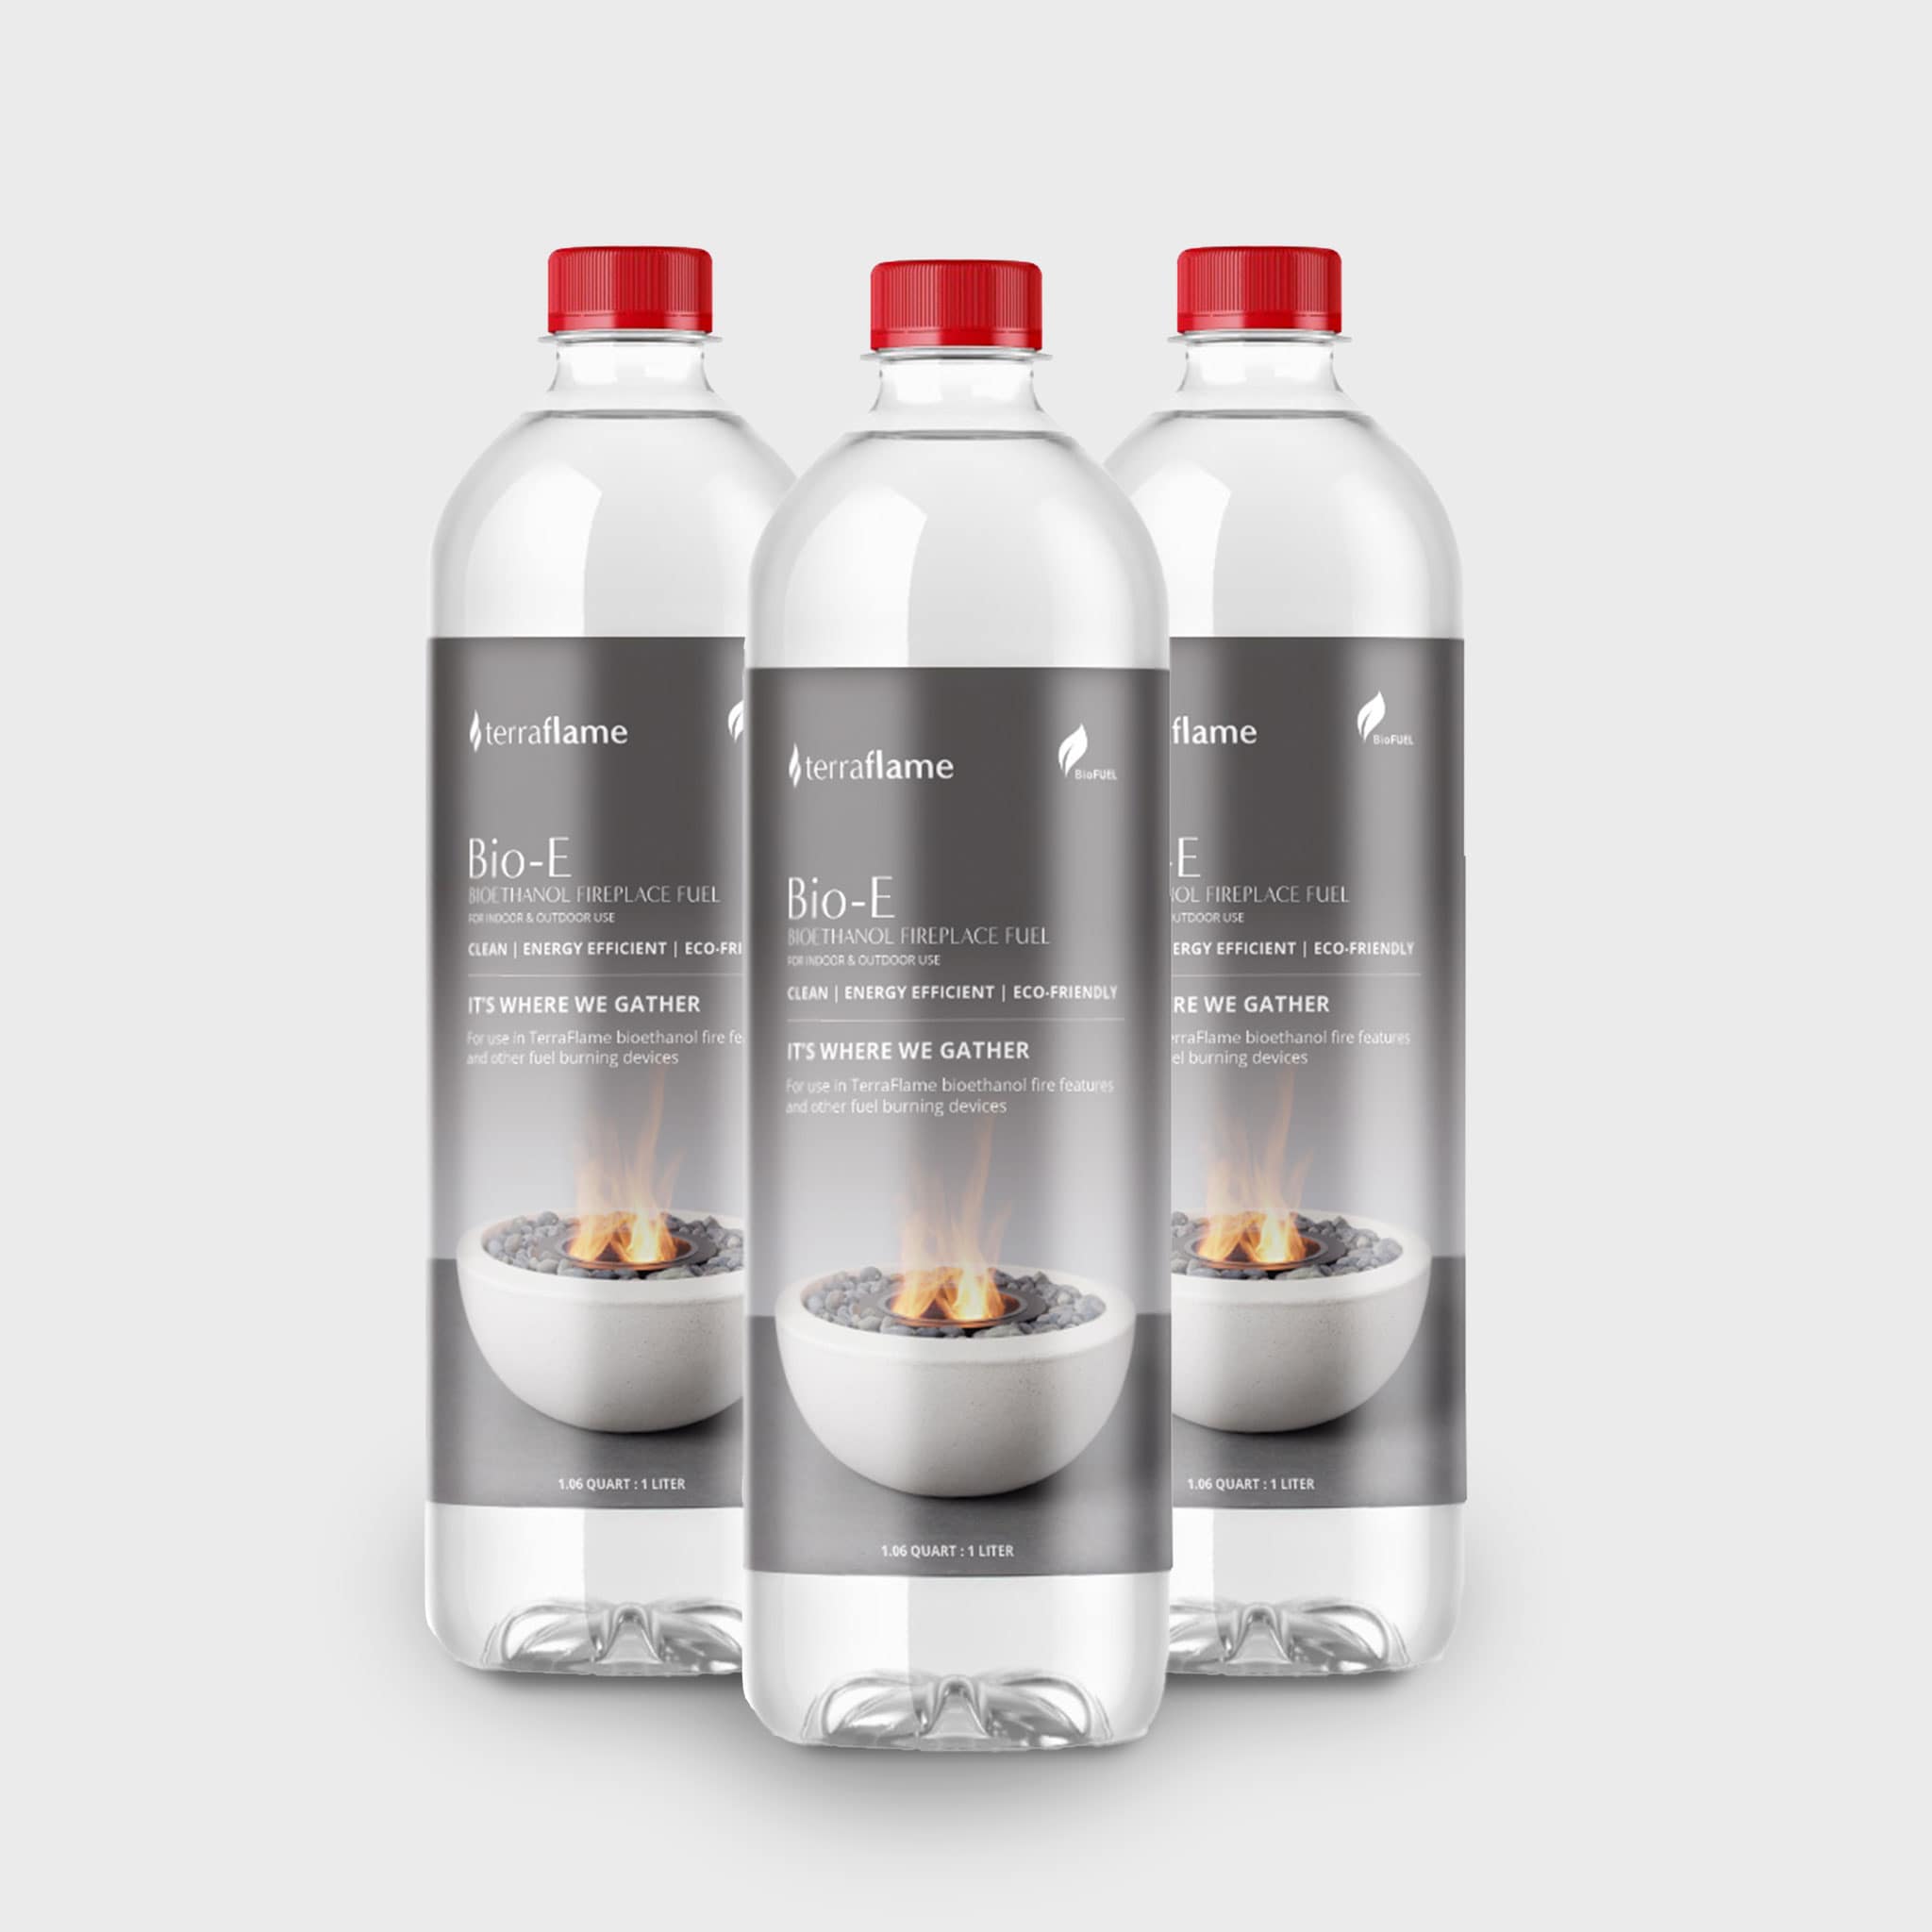 CozyApex Table Bio Ethanol Fuel Oval Fireplace - Unique Alcohol Gel In